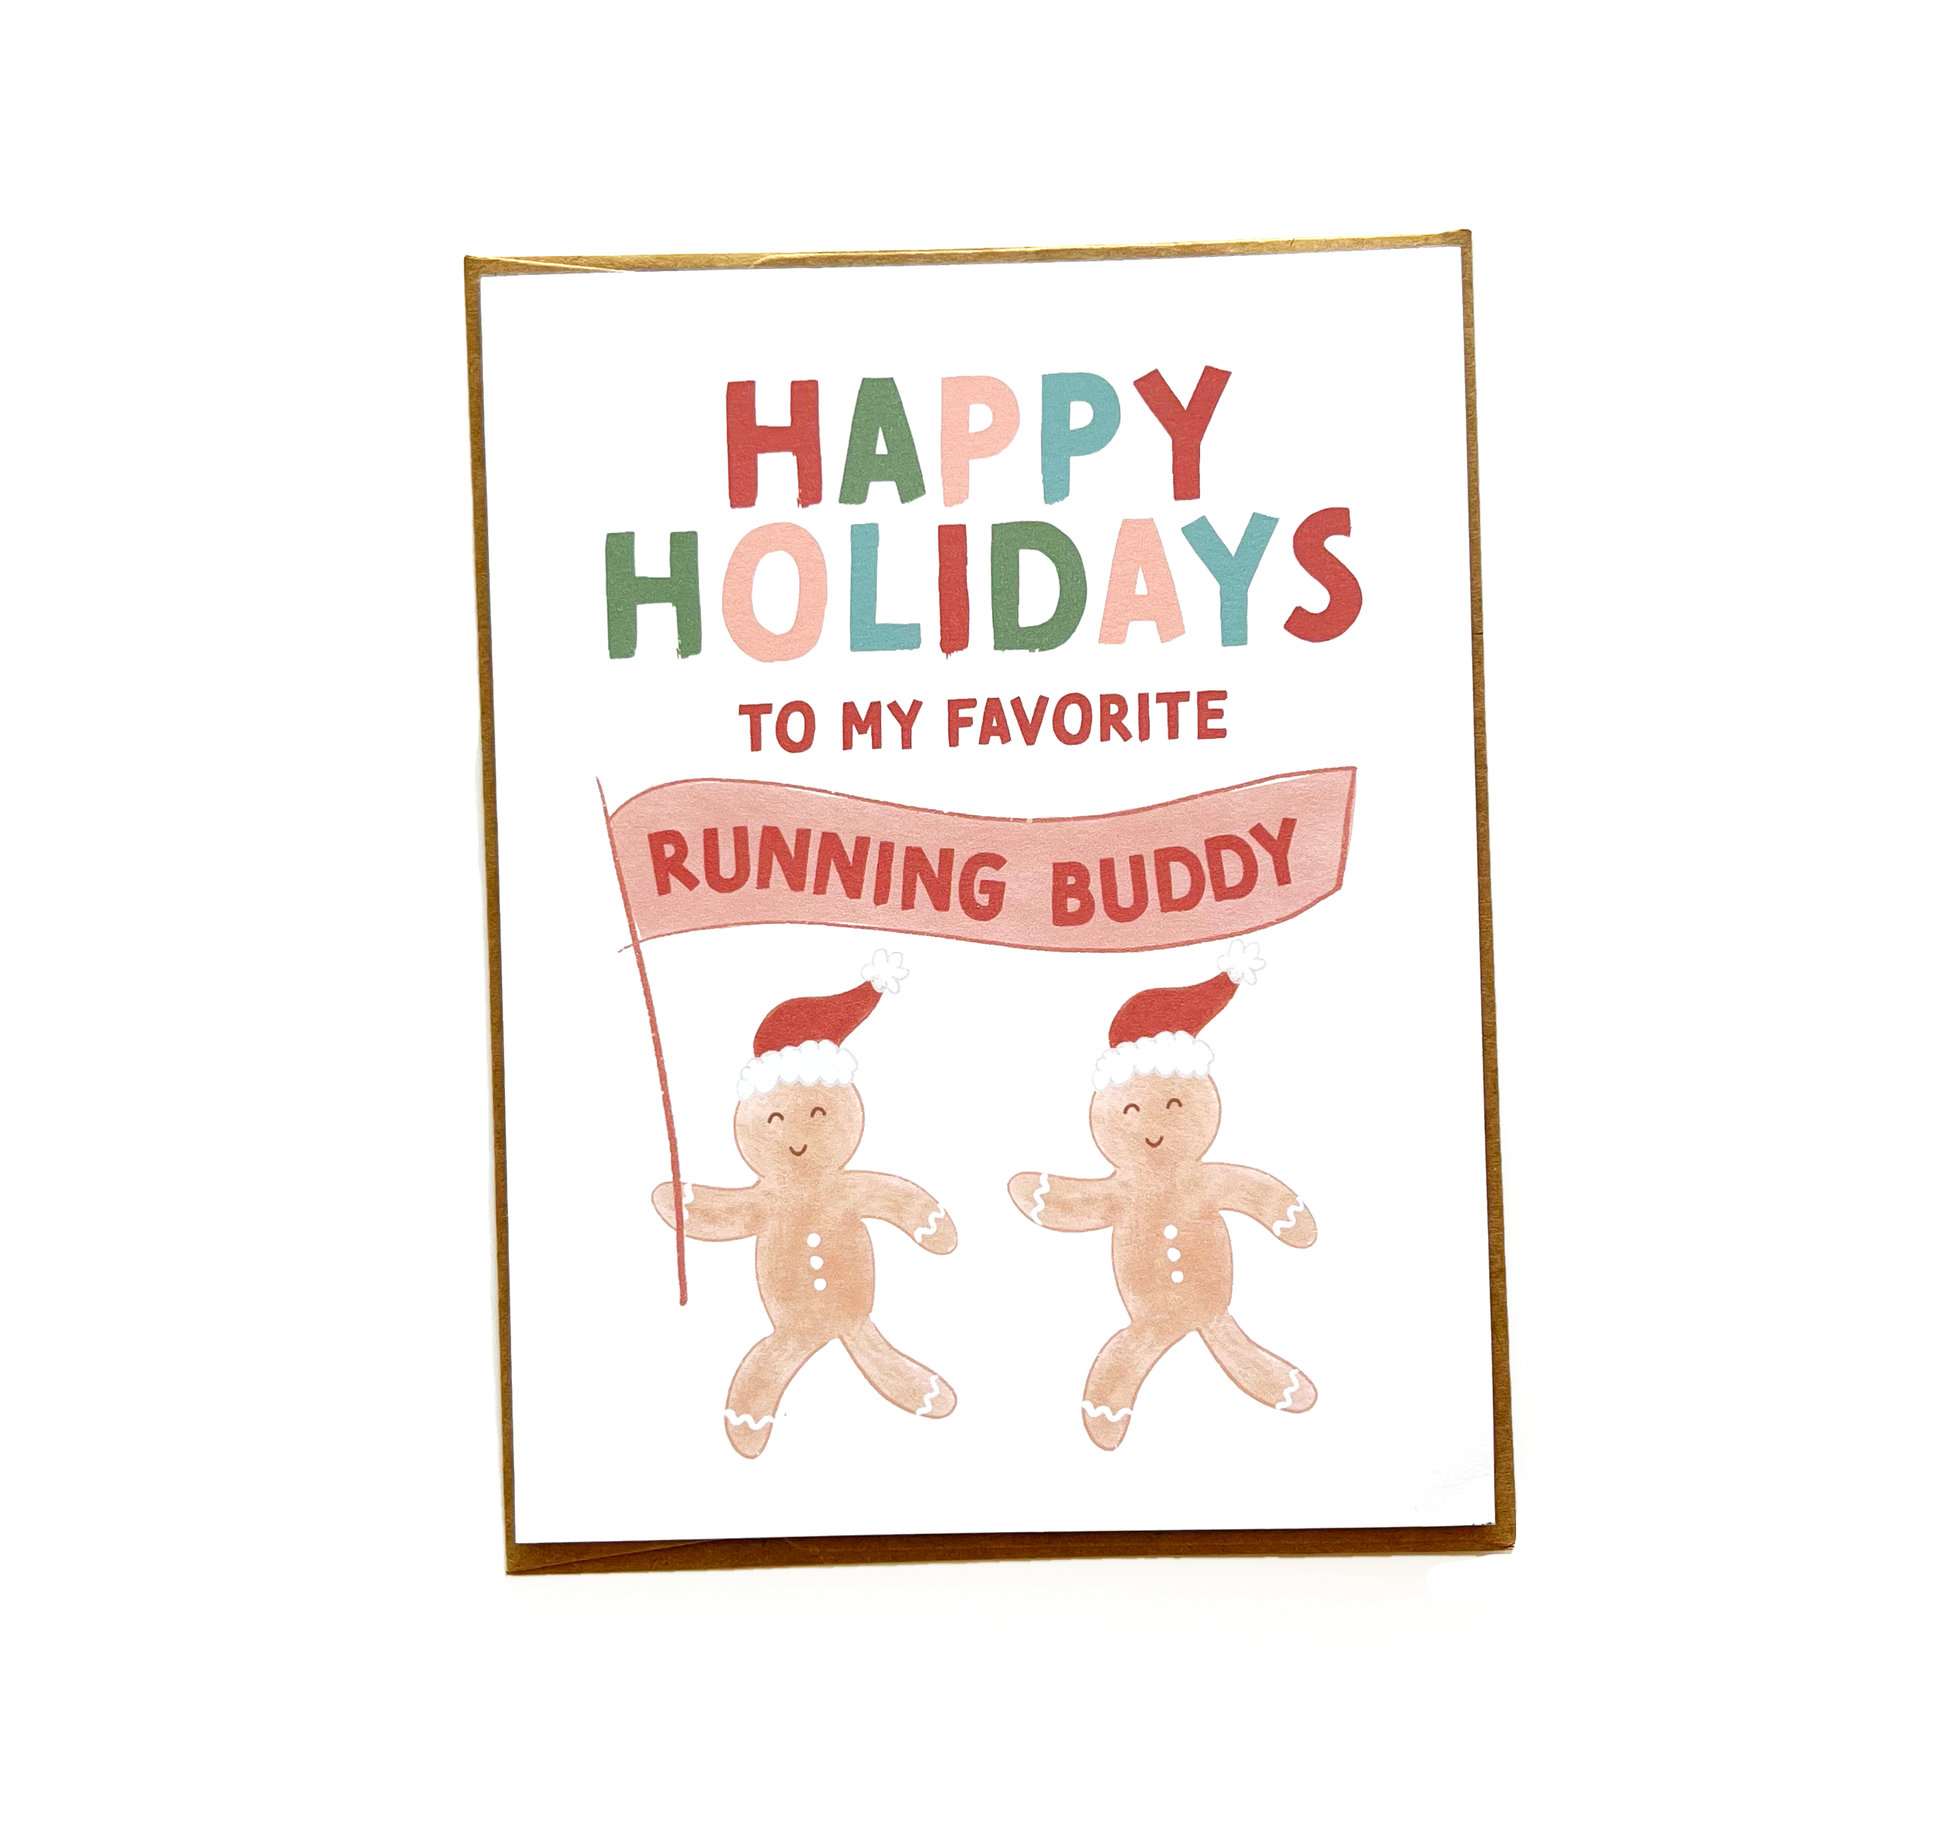 Happy holidays to my favorite running buddy with two gingerbread people running